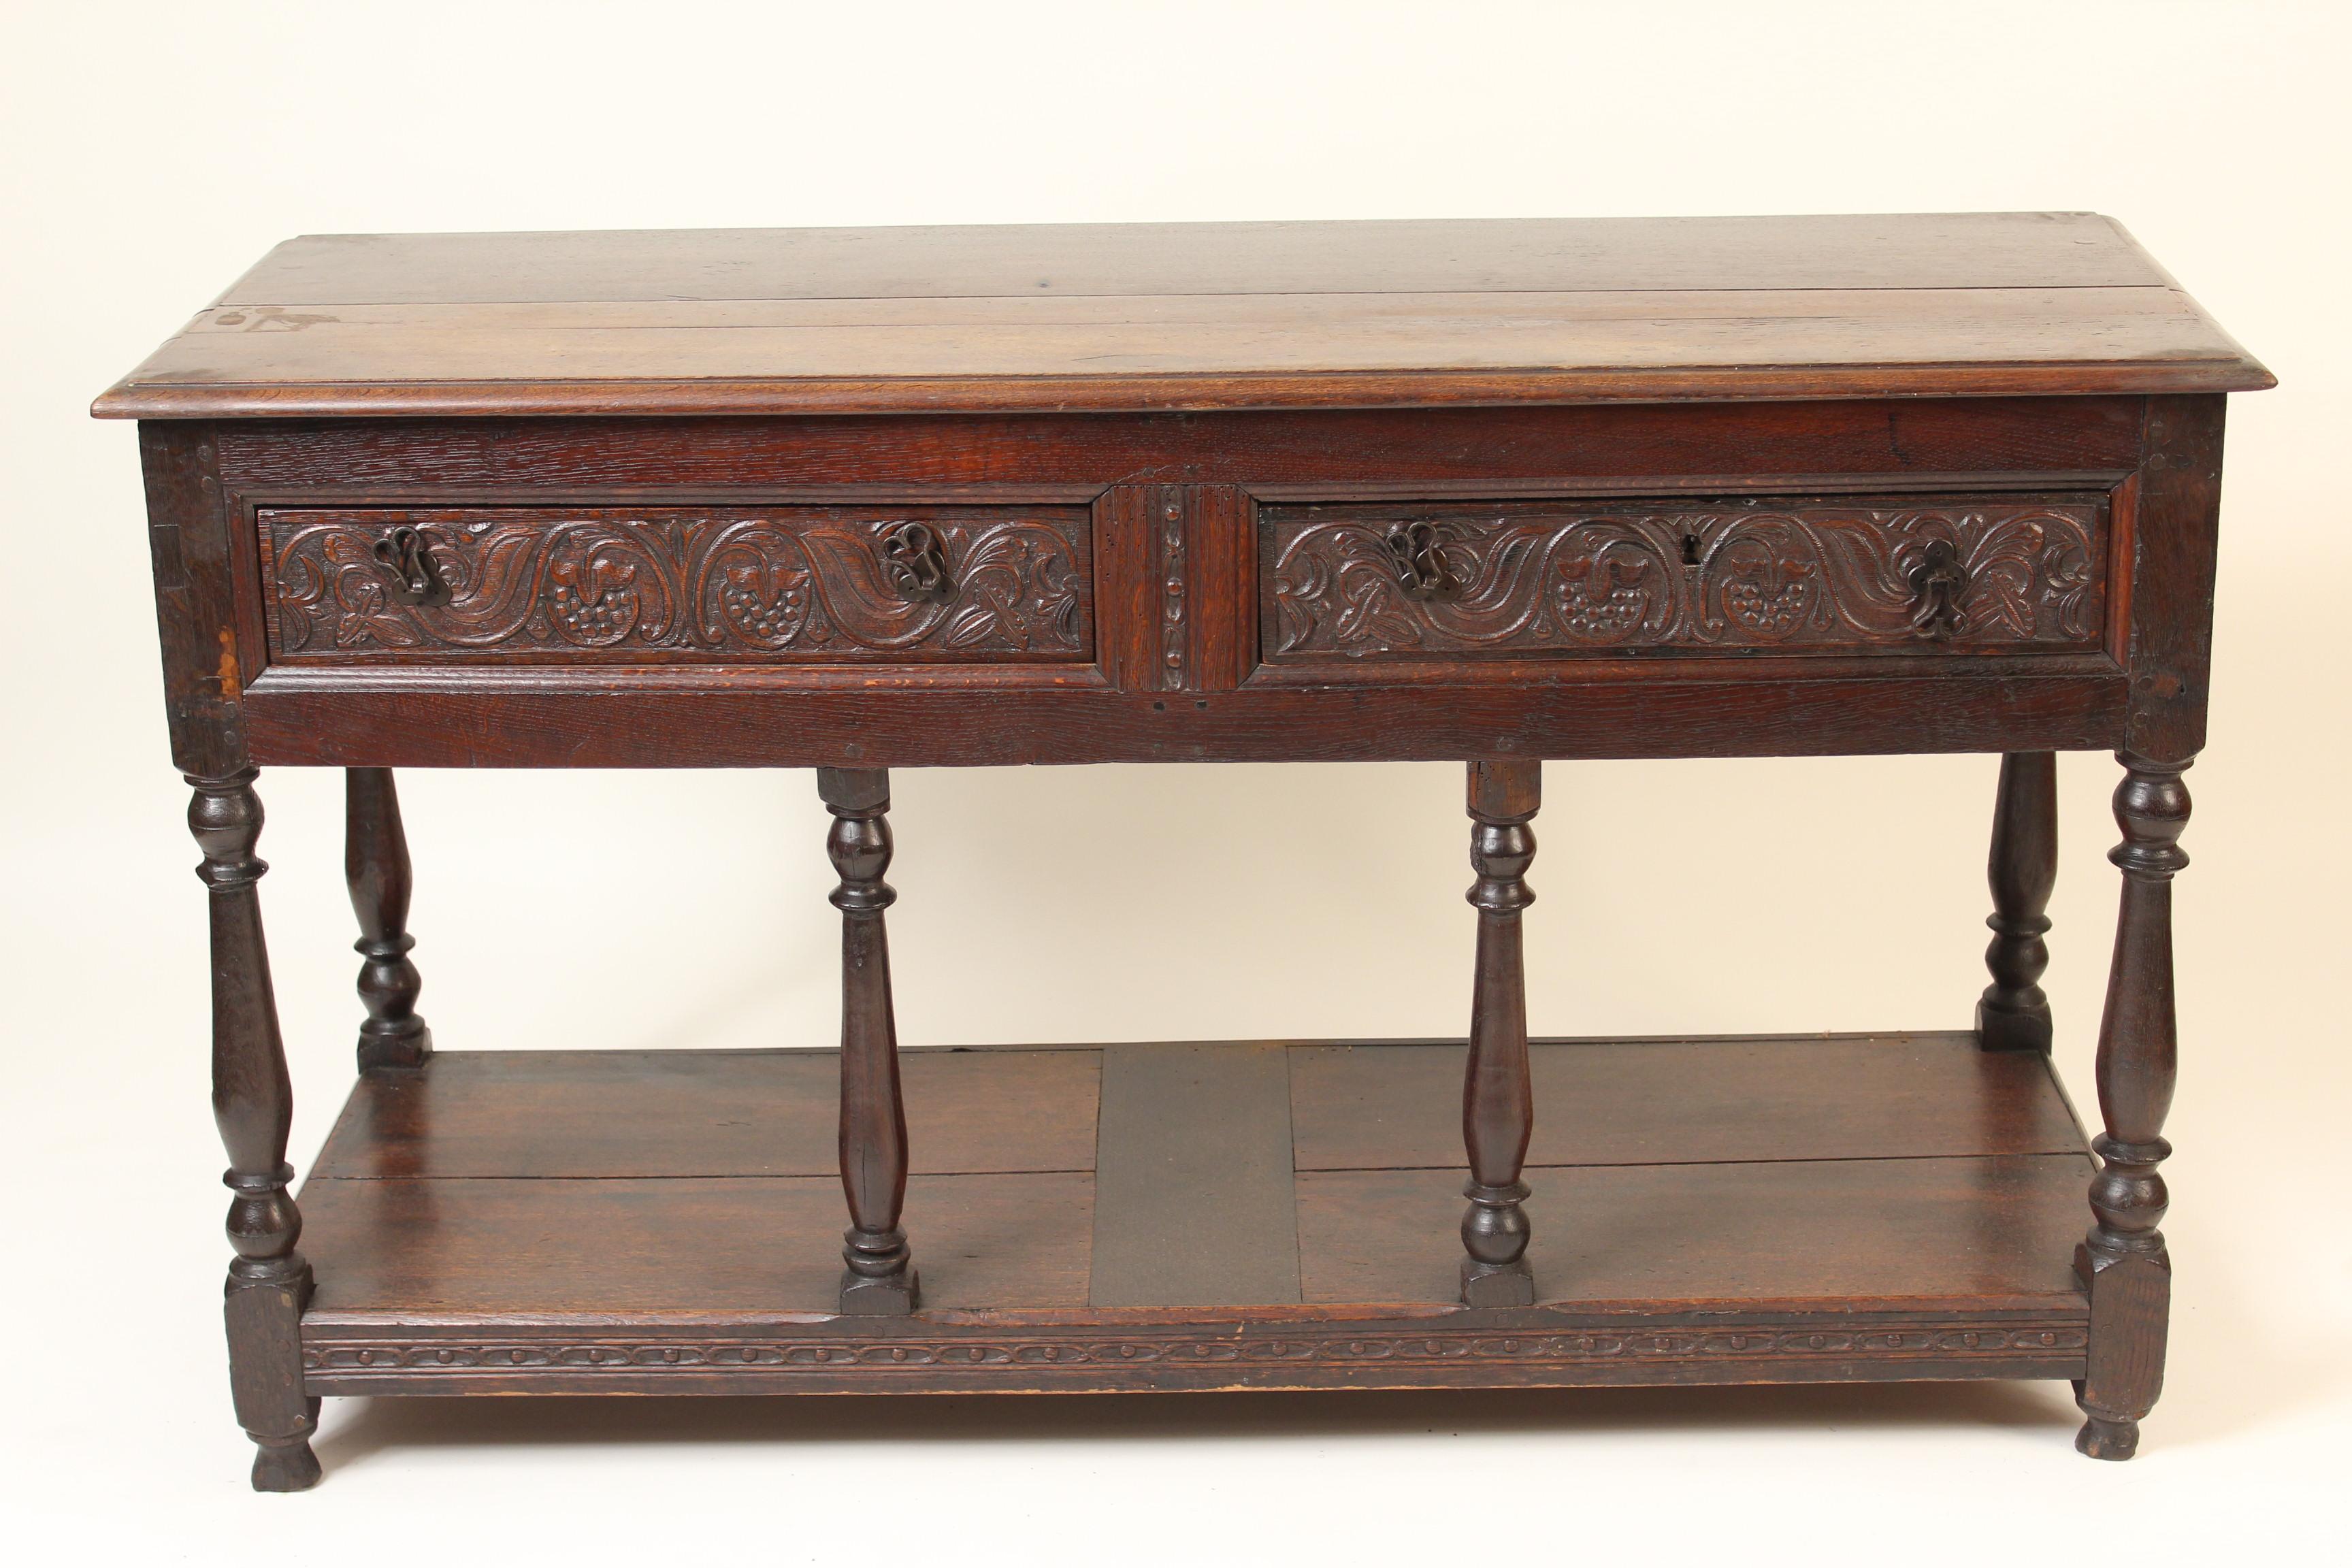 Continental baroque style oak sideboard, 19th century.